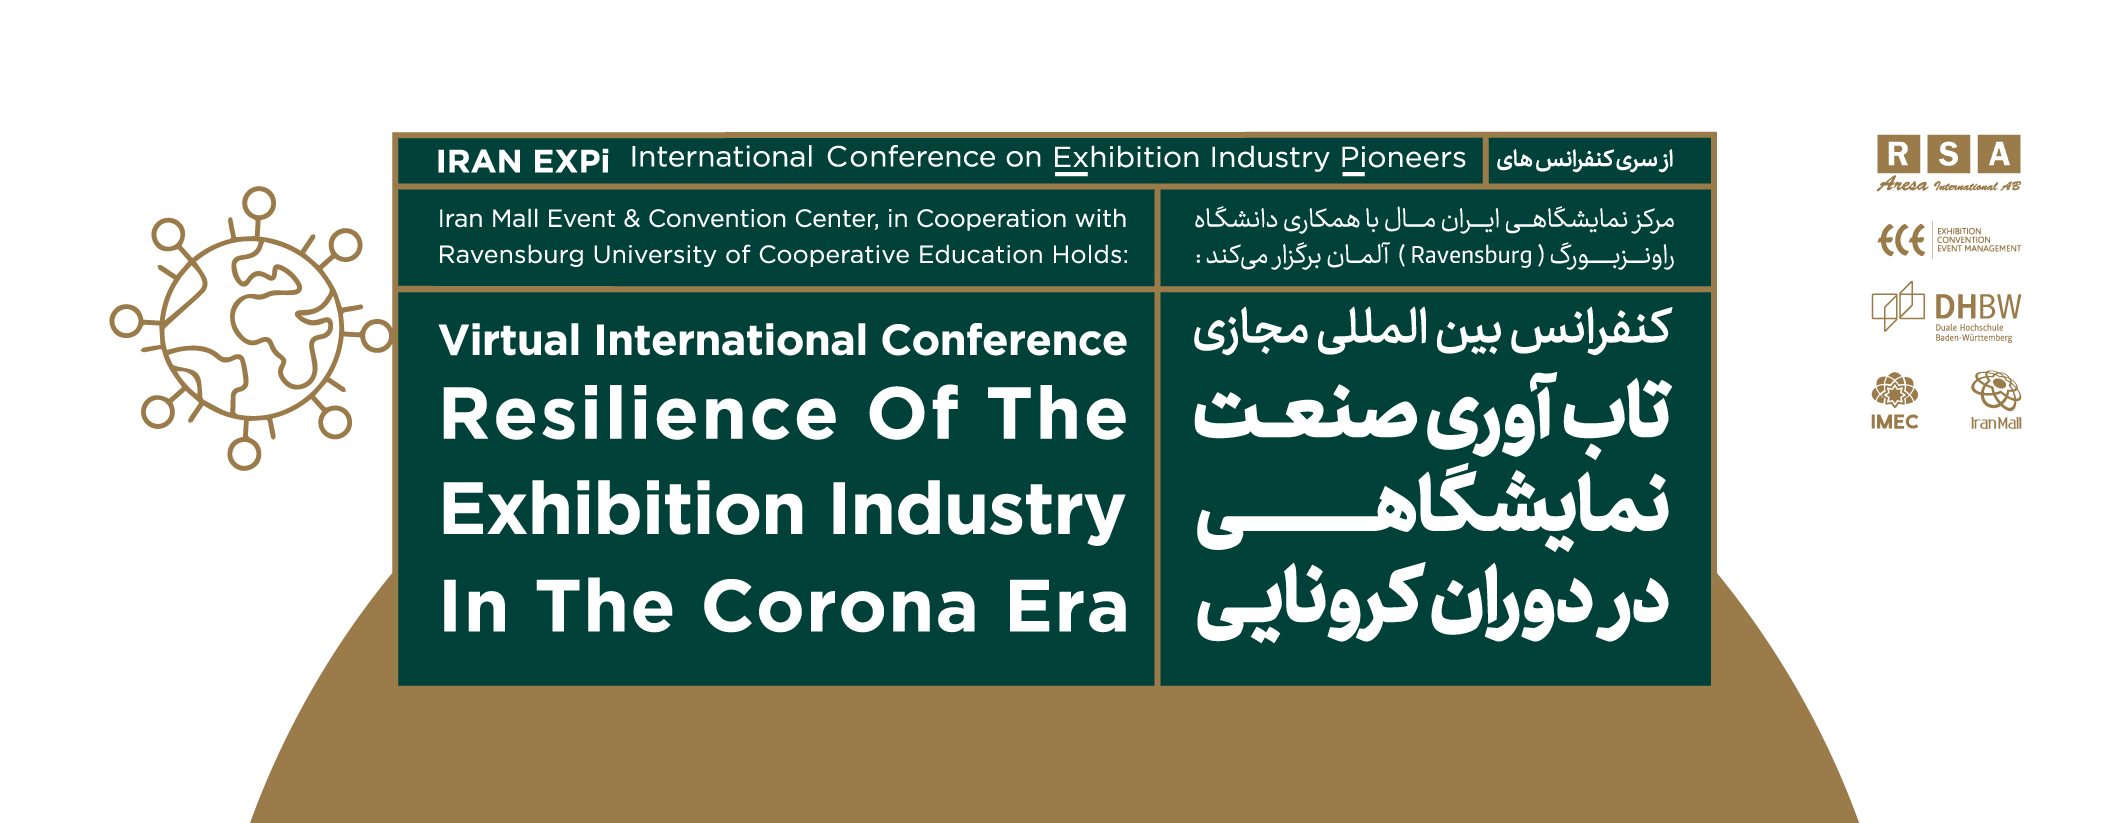 The Virtual International Conference of “Resilience Of the Exhibition Industry in the Corona Era”